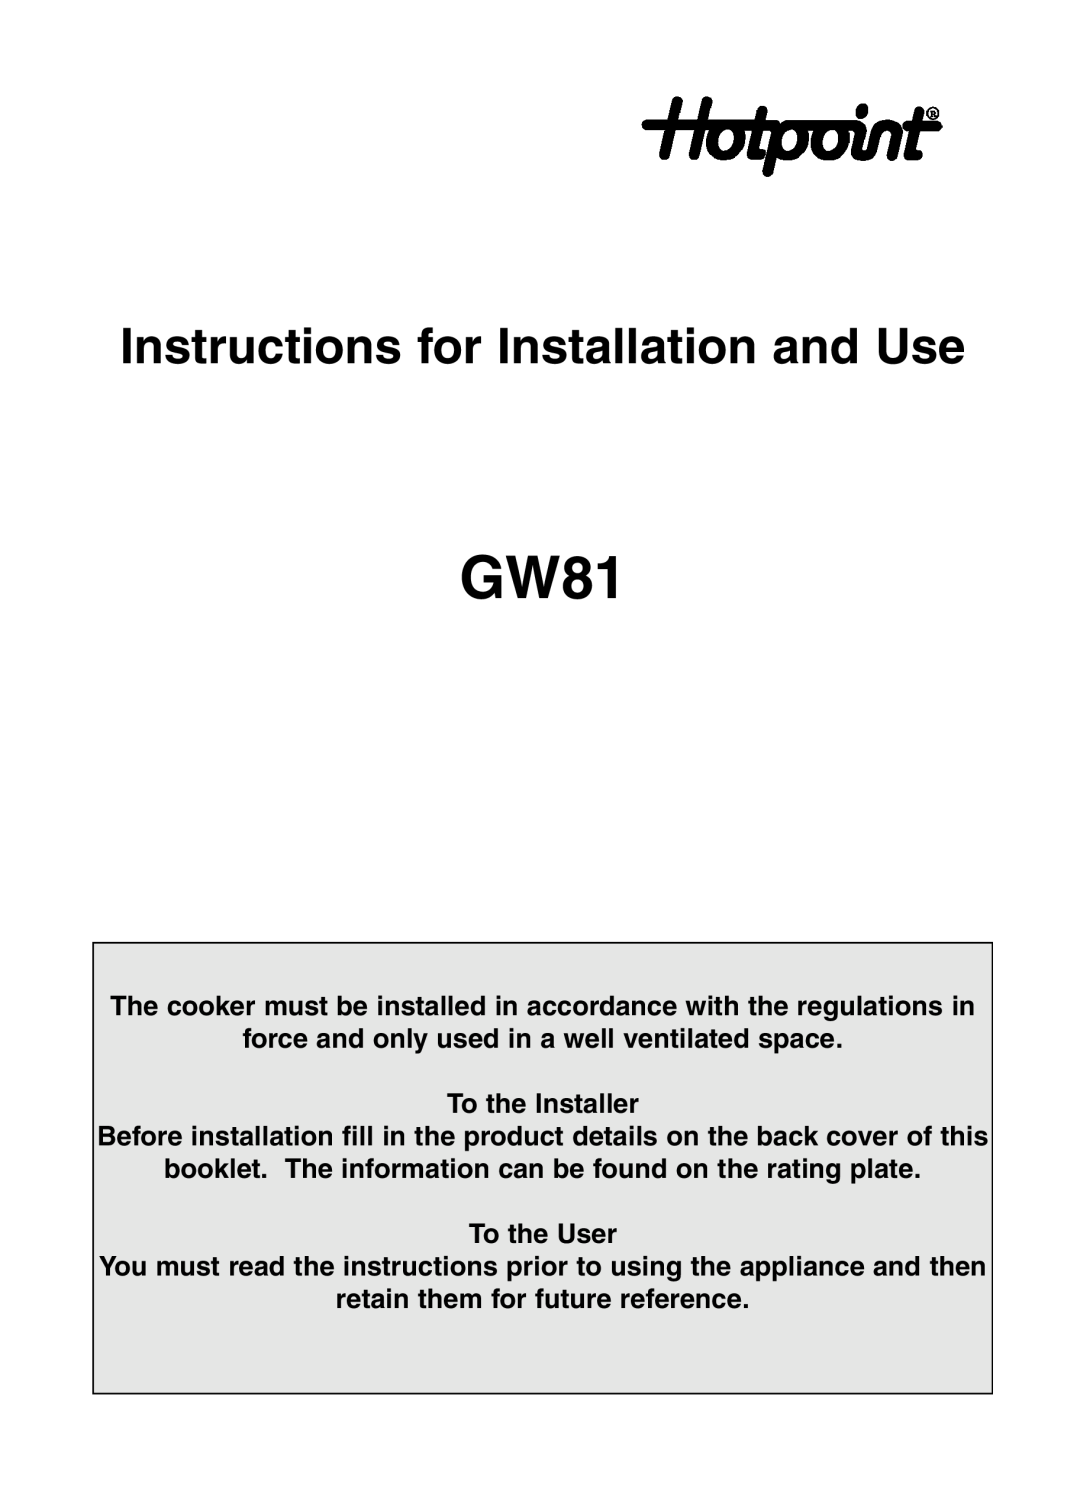 Hotpoint GW81 manual Instructions for Installation and Use, force and only used in a well ventilated space, To the User 